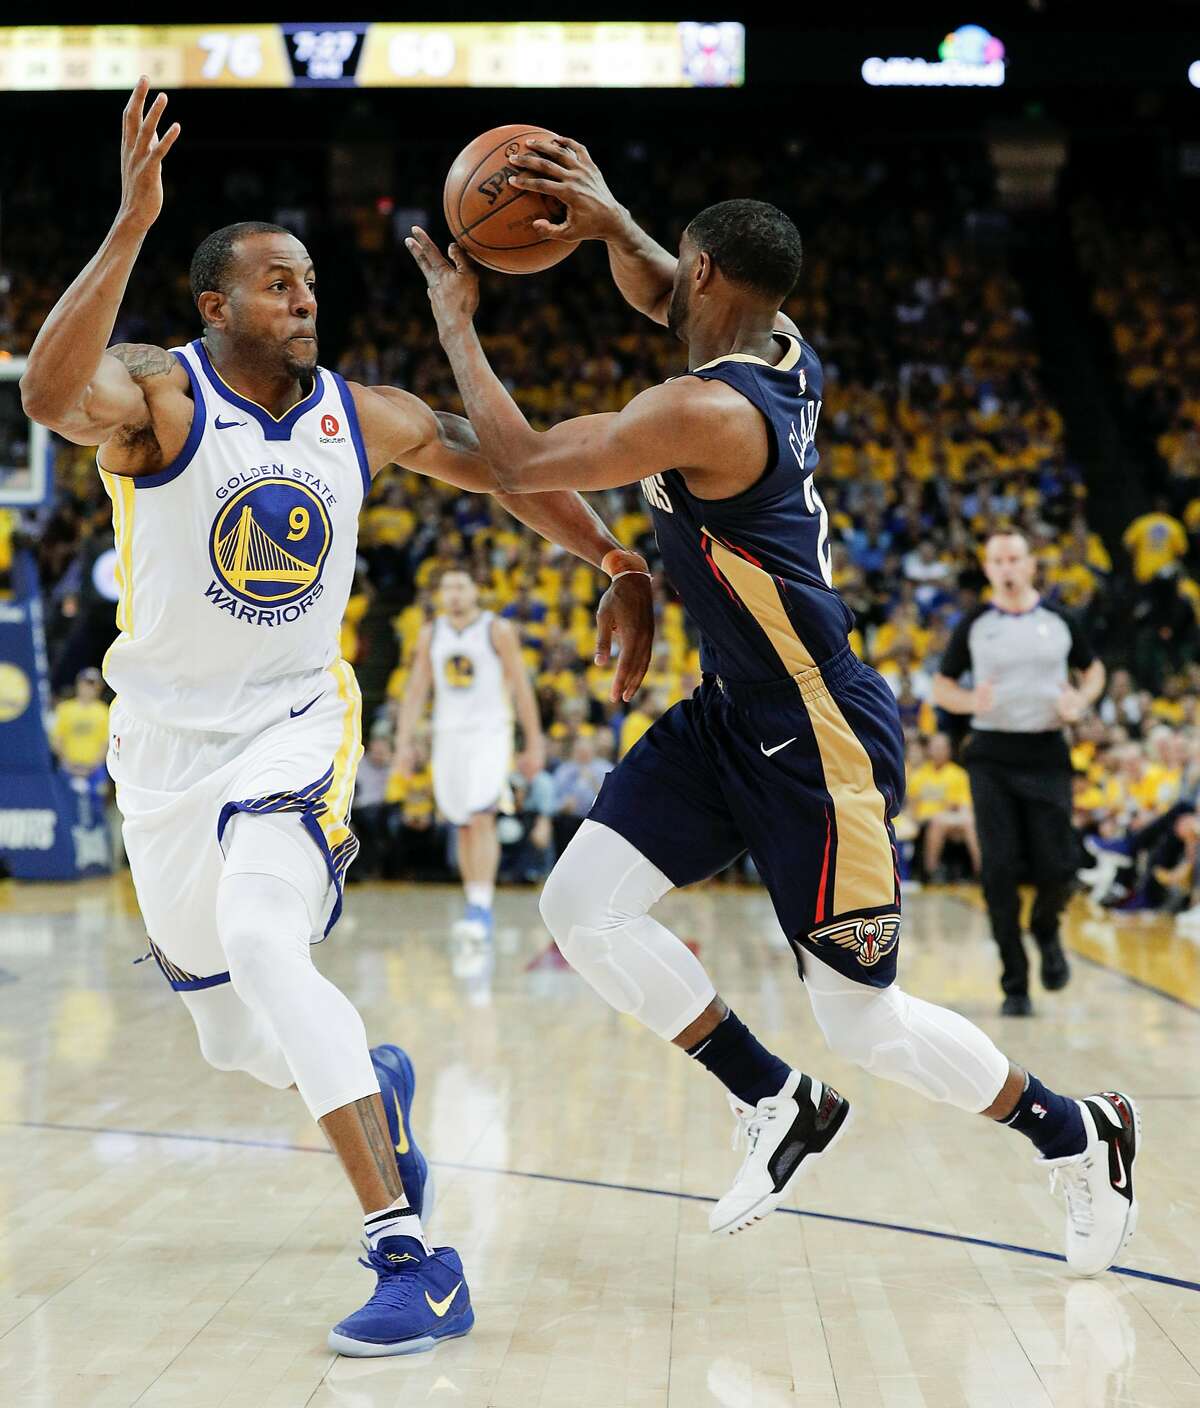 Golden State Warriors' Andre Iguodala defends against New Orleans Pelicans' Ian Clark in the third quarter during game 5 of the Western Conference Semifinals between the Golden State Warriors and the New Orleans Pelicans at Oracle Arena on Tuesday, May 8, 2018 in Oakland, Calif.